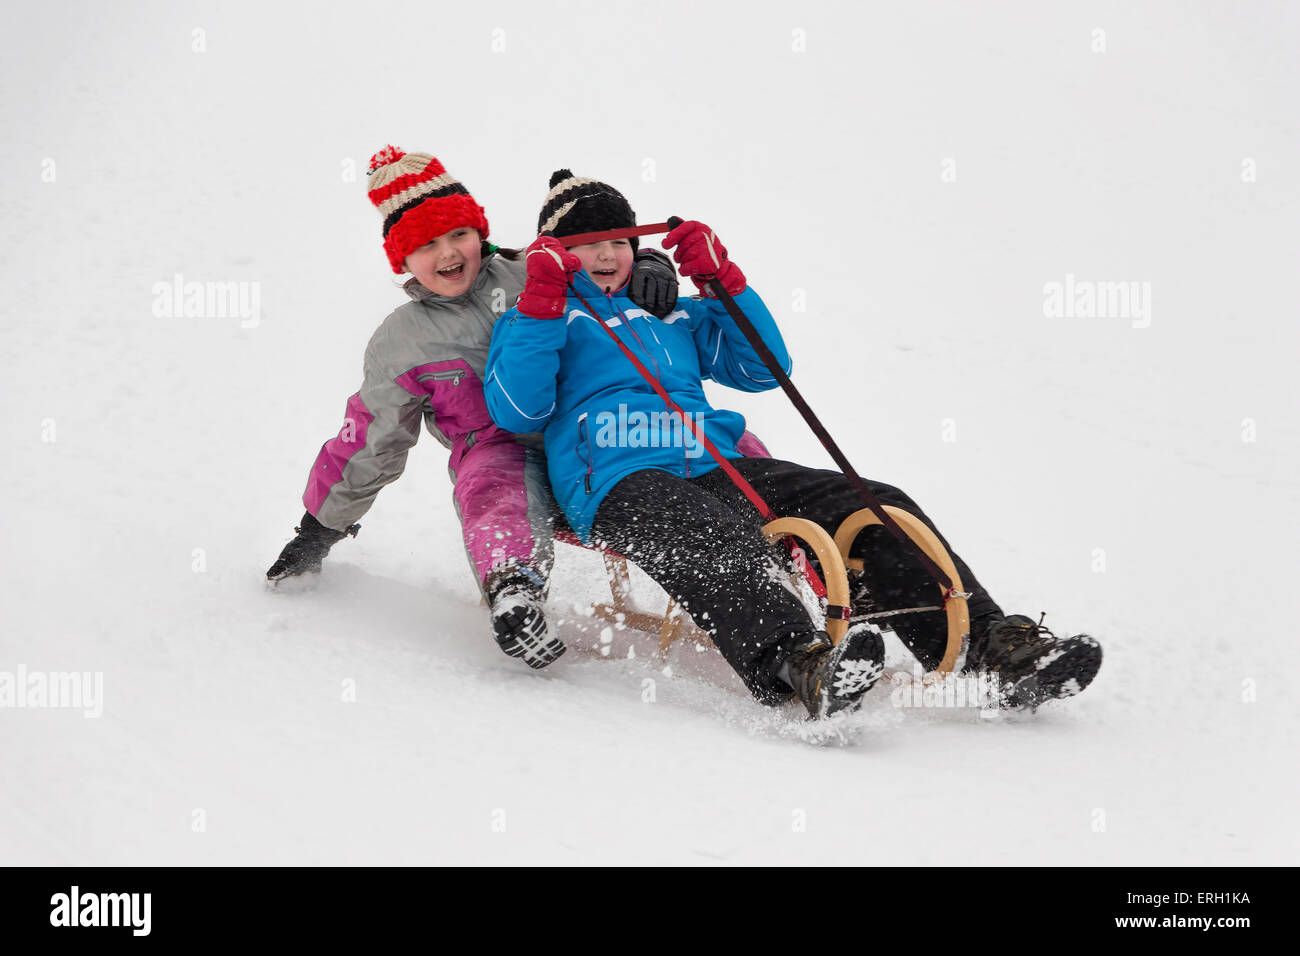 Two little girl in winter activity, sledging on wooden sledge downhill. Concept of winter activity enjoyed by children. Stock Photo